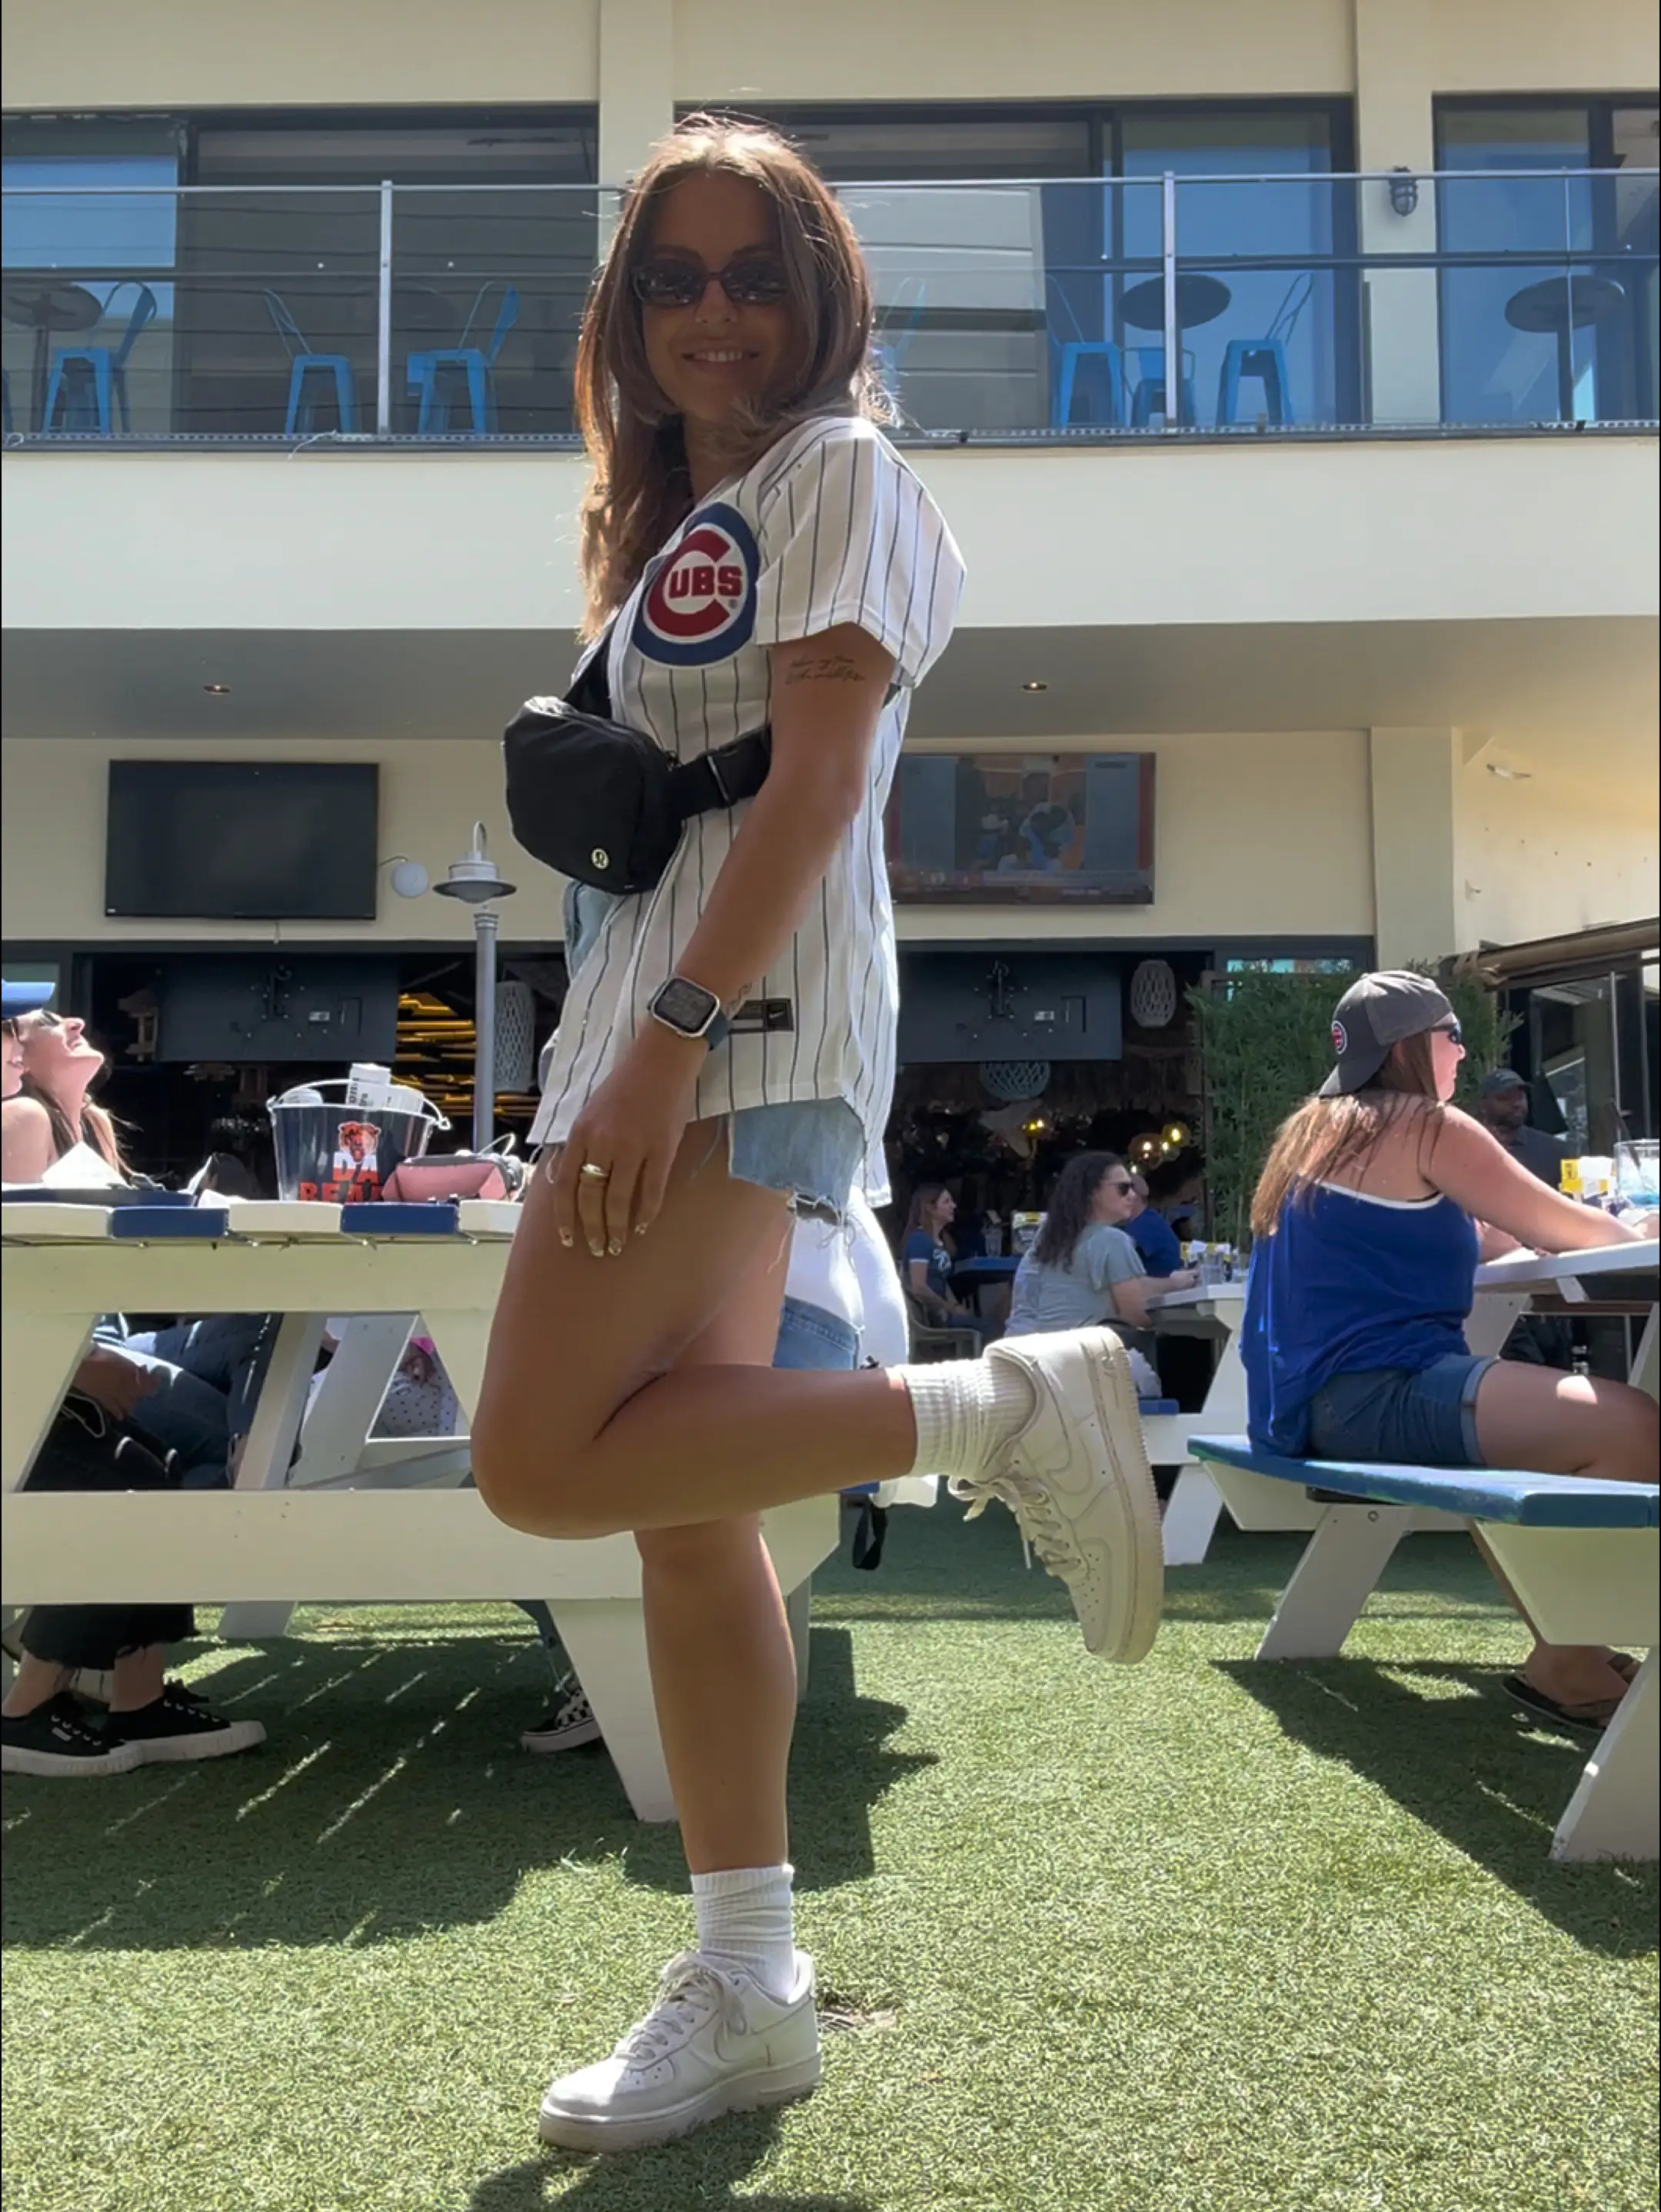 WHAT I WORE TO THE CUBS GAME, Video published by Sydney Austin